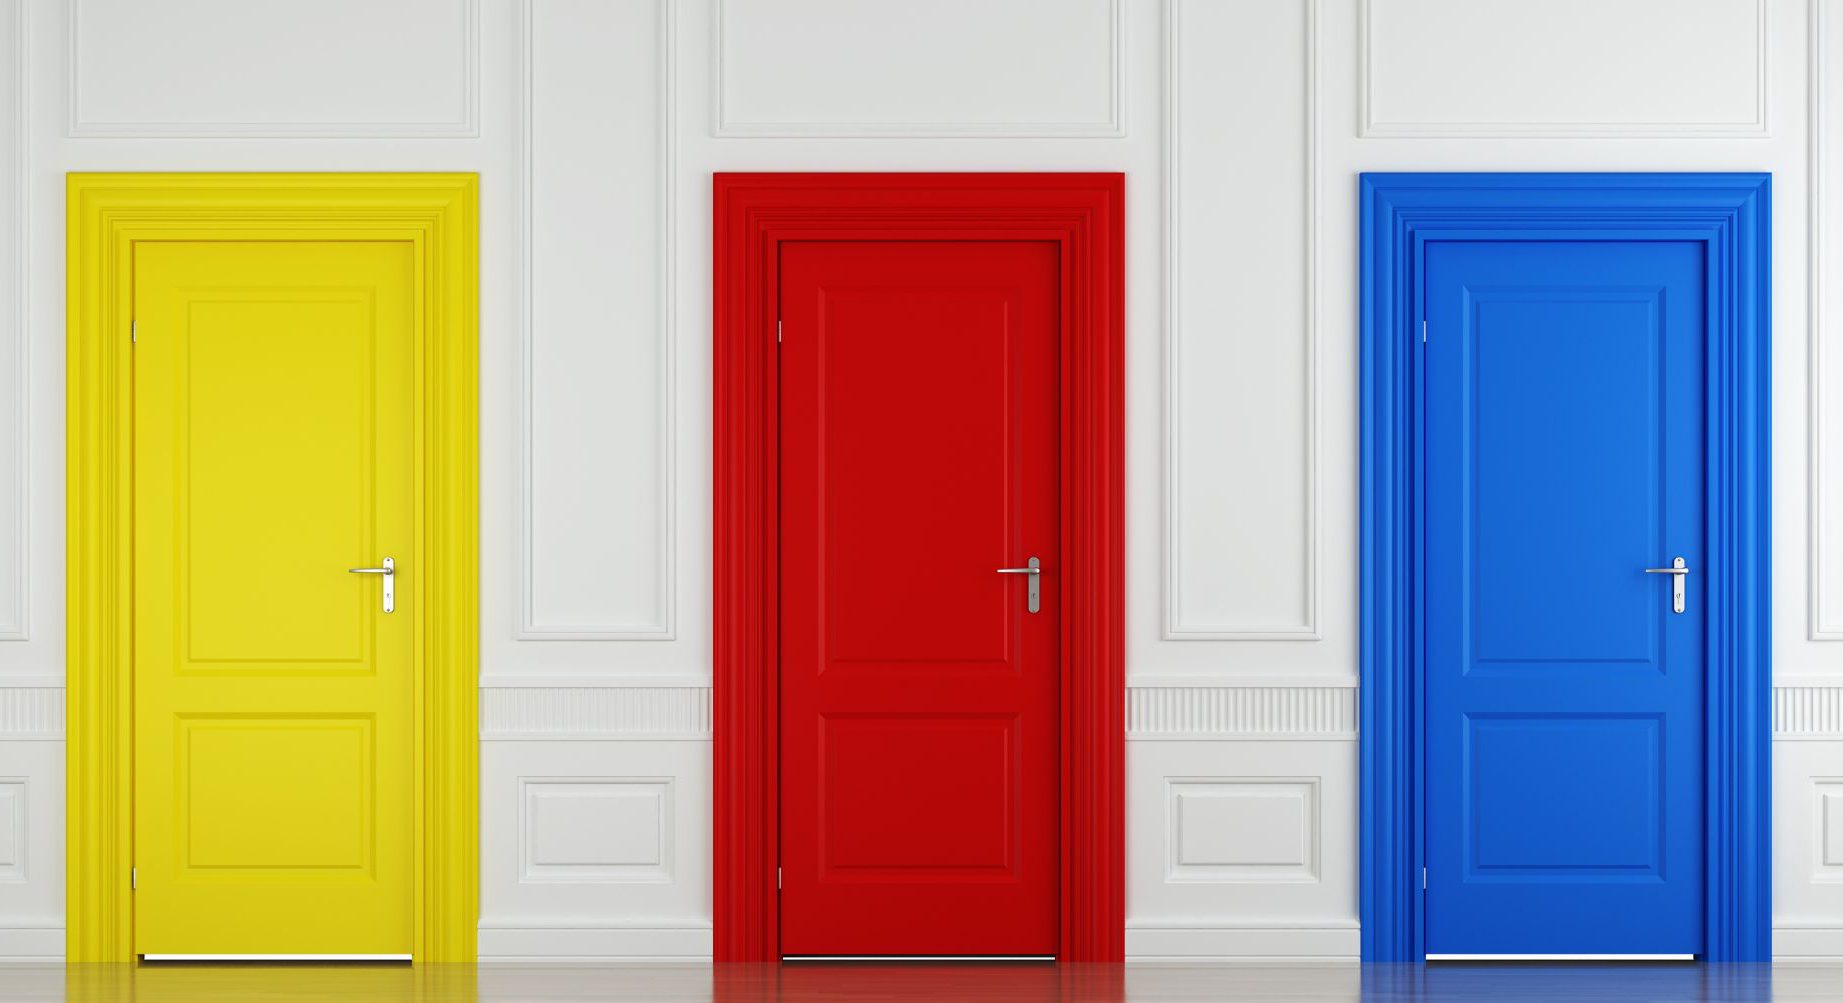 Global Doors Market Growth Analysis And Indications – Includes Doors Market Size